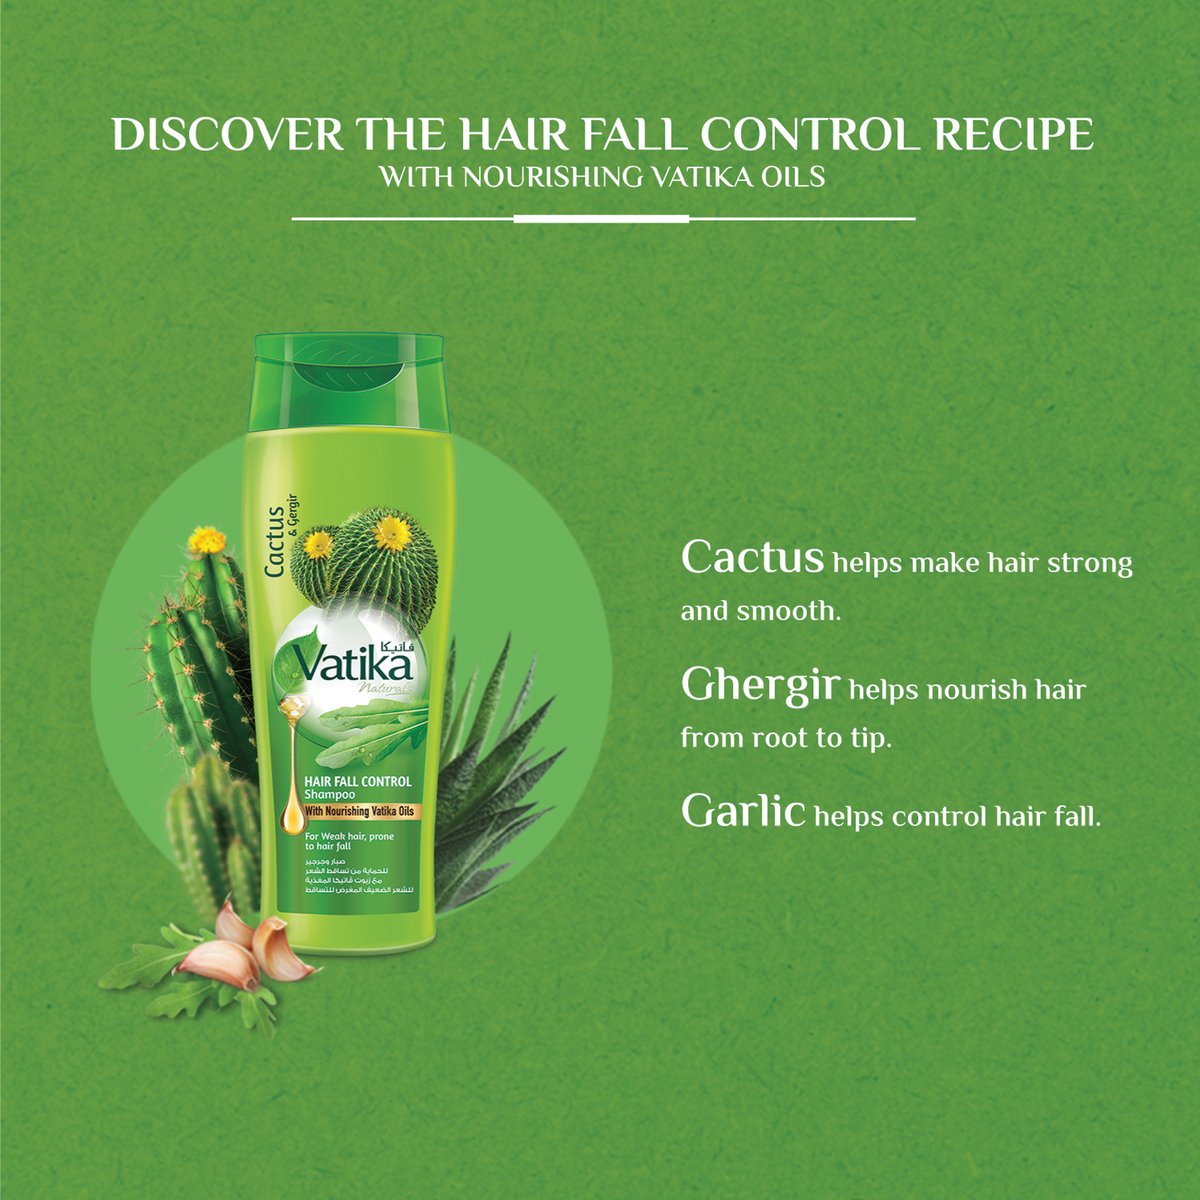 Vatika Naturals Hair Fall Control Shampoo Enriched with Garlic, Cactus & Gergir Extracts For Weak Hair Prone to Hair Fall With Nourishing Vatika Oils 400 ml + 200 ml